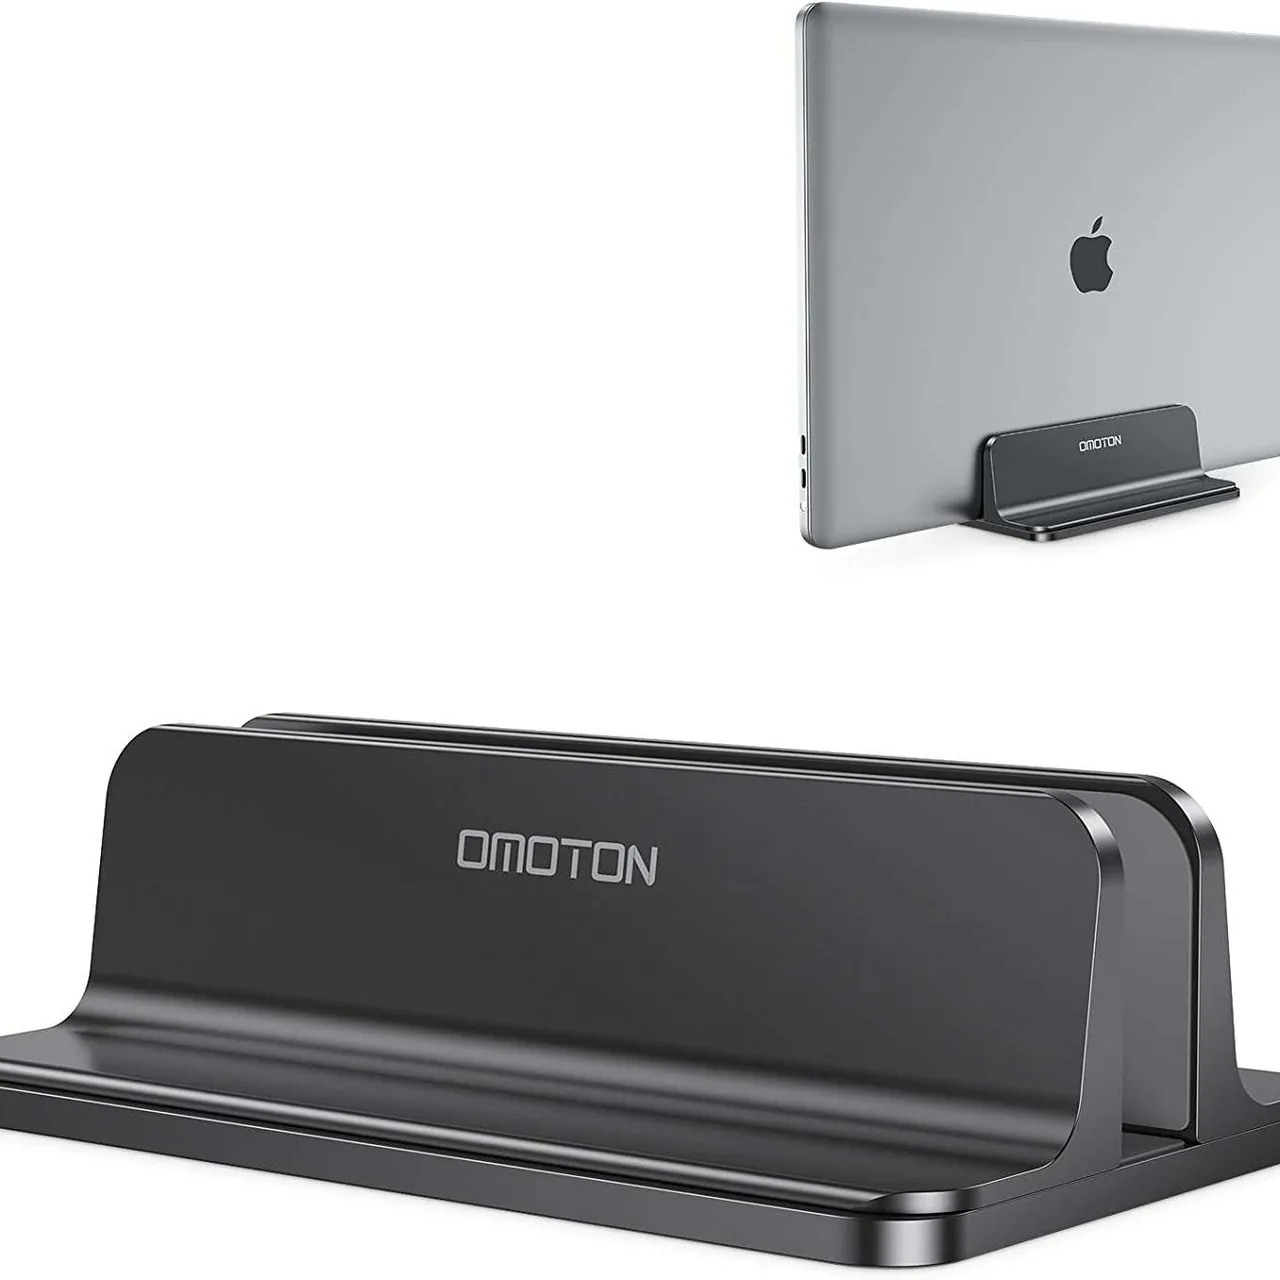 ISO - Vertical laptop stand like this photo 1